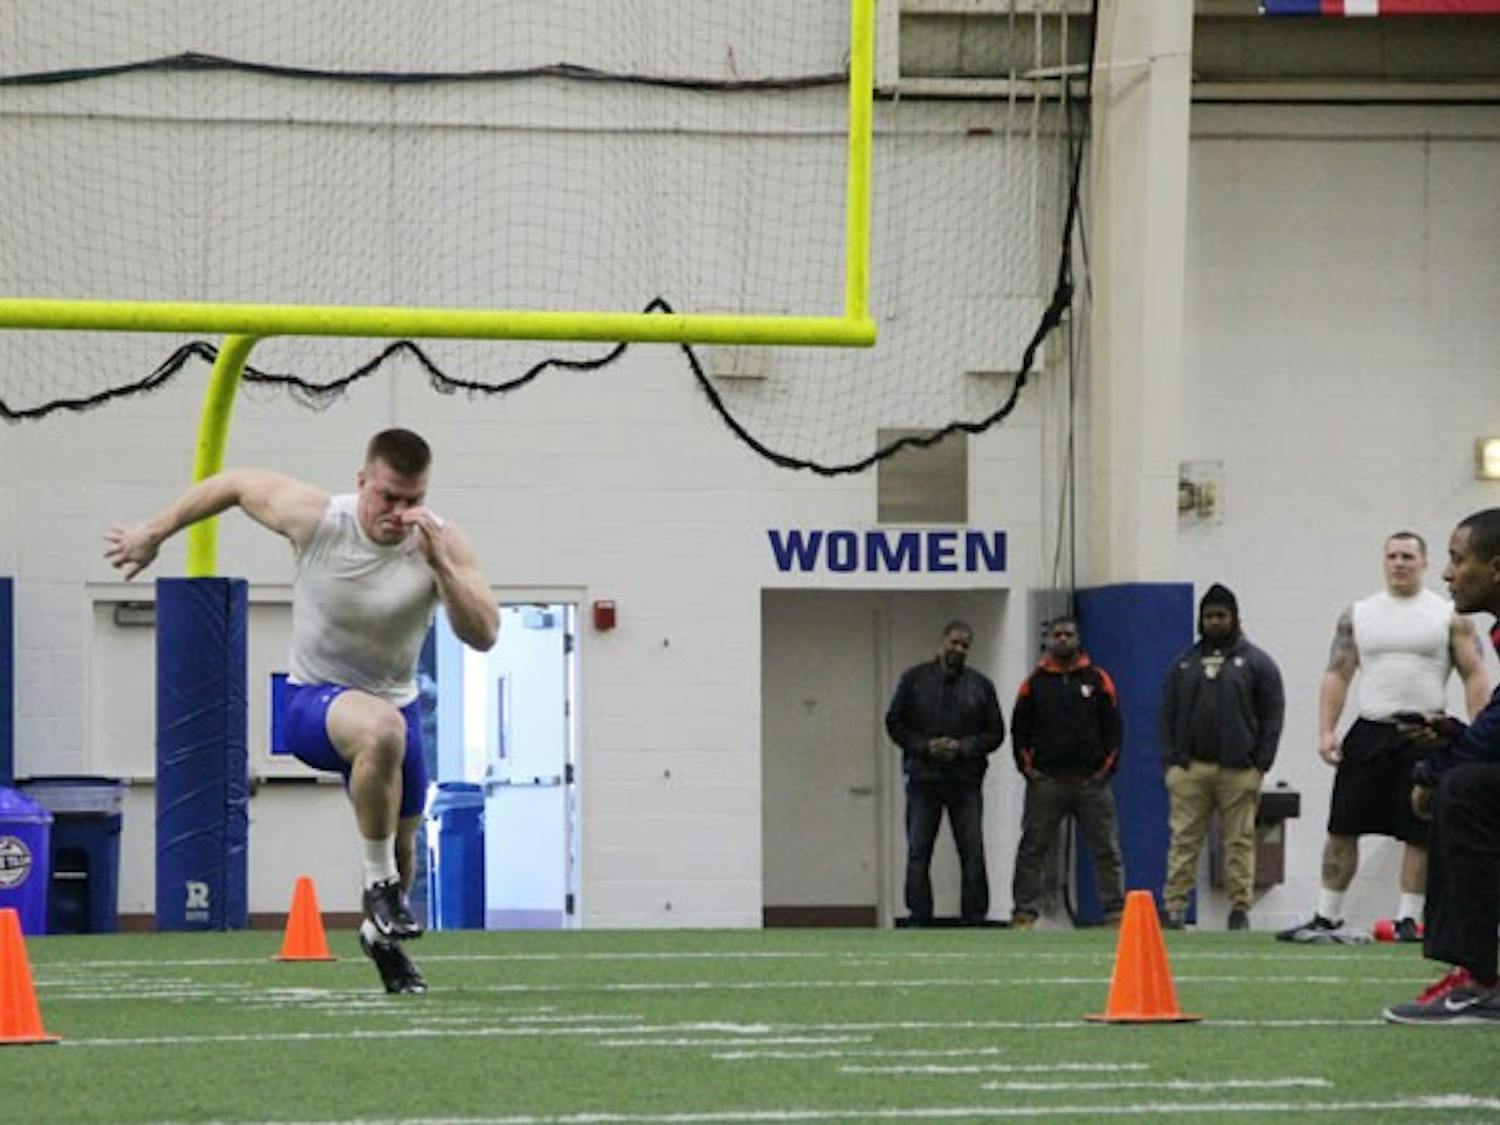 Lee Skinner competes in the 40-yard dash at Thursday's Pro Day in Ralph Wilson Stadium.